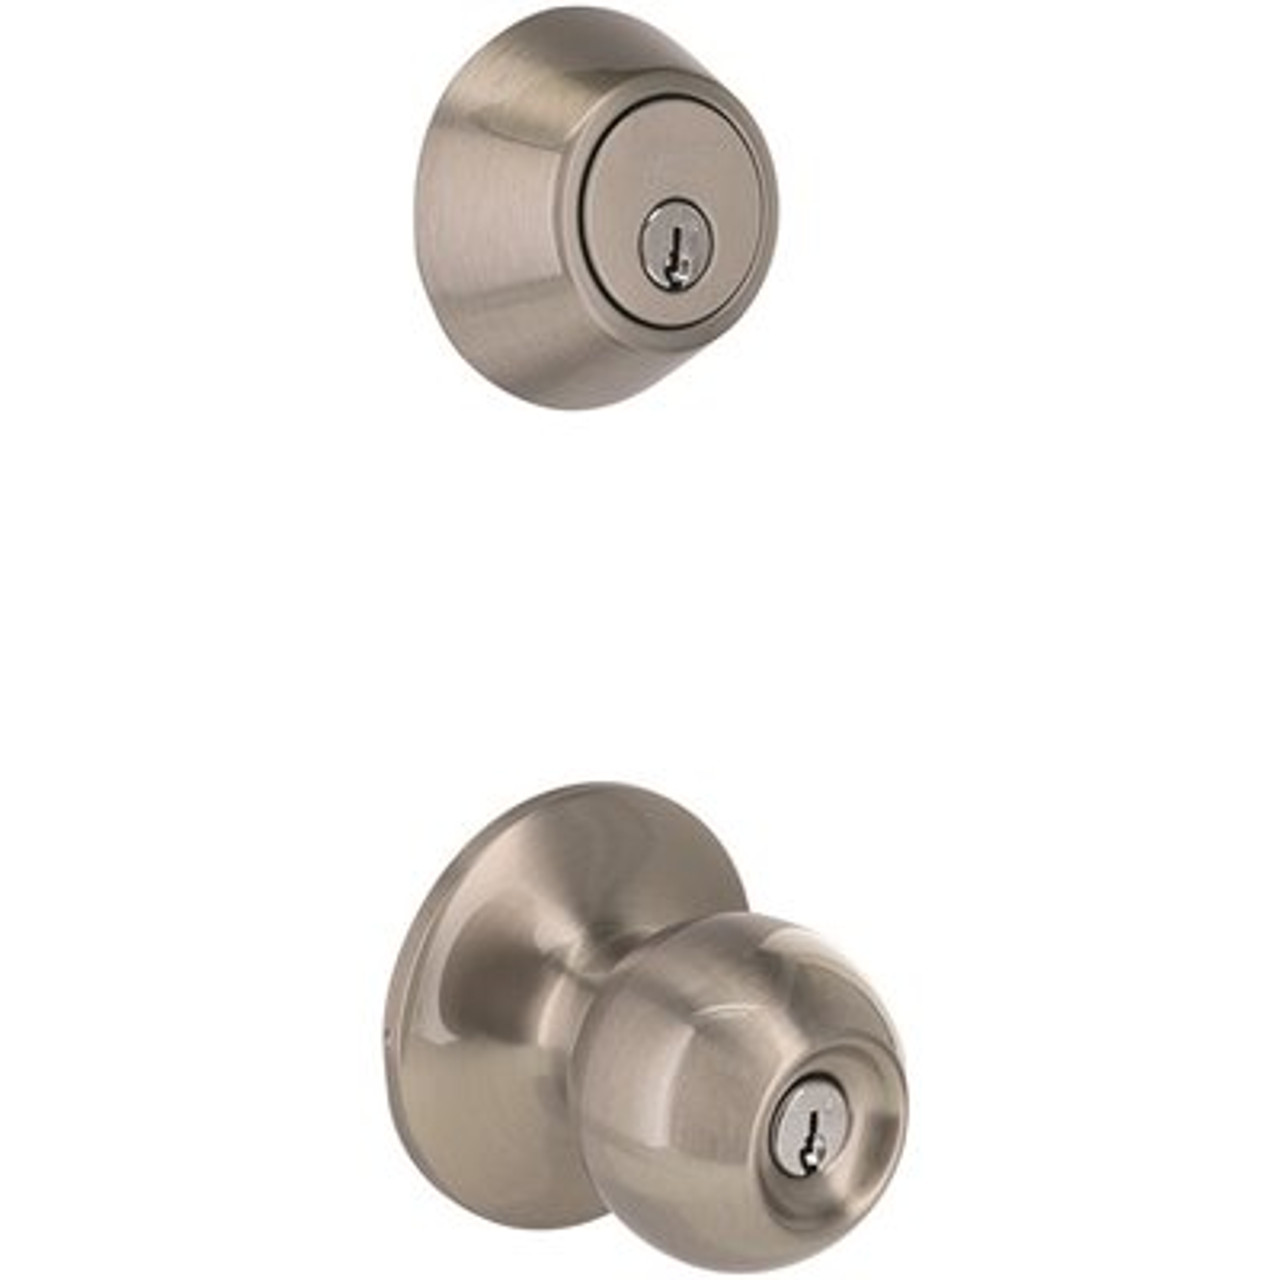 Round Deadbolt and Entry Combo Pack 2-3/8" and 2-3/4" Backset Grade 3 Satin Nickel